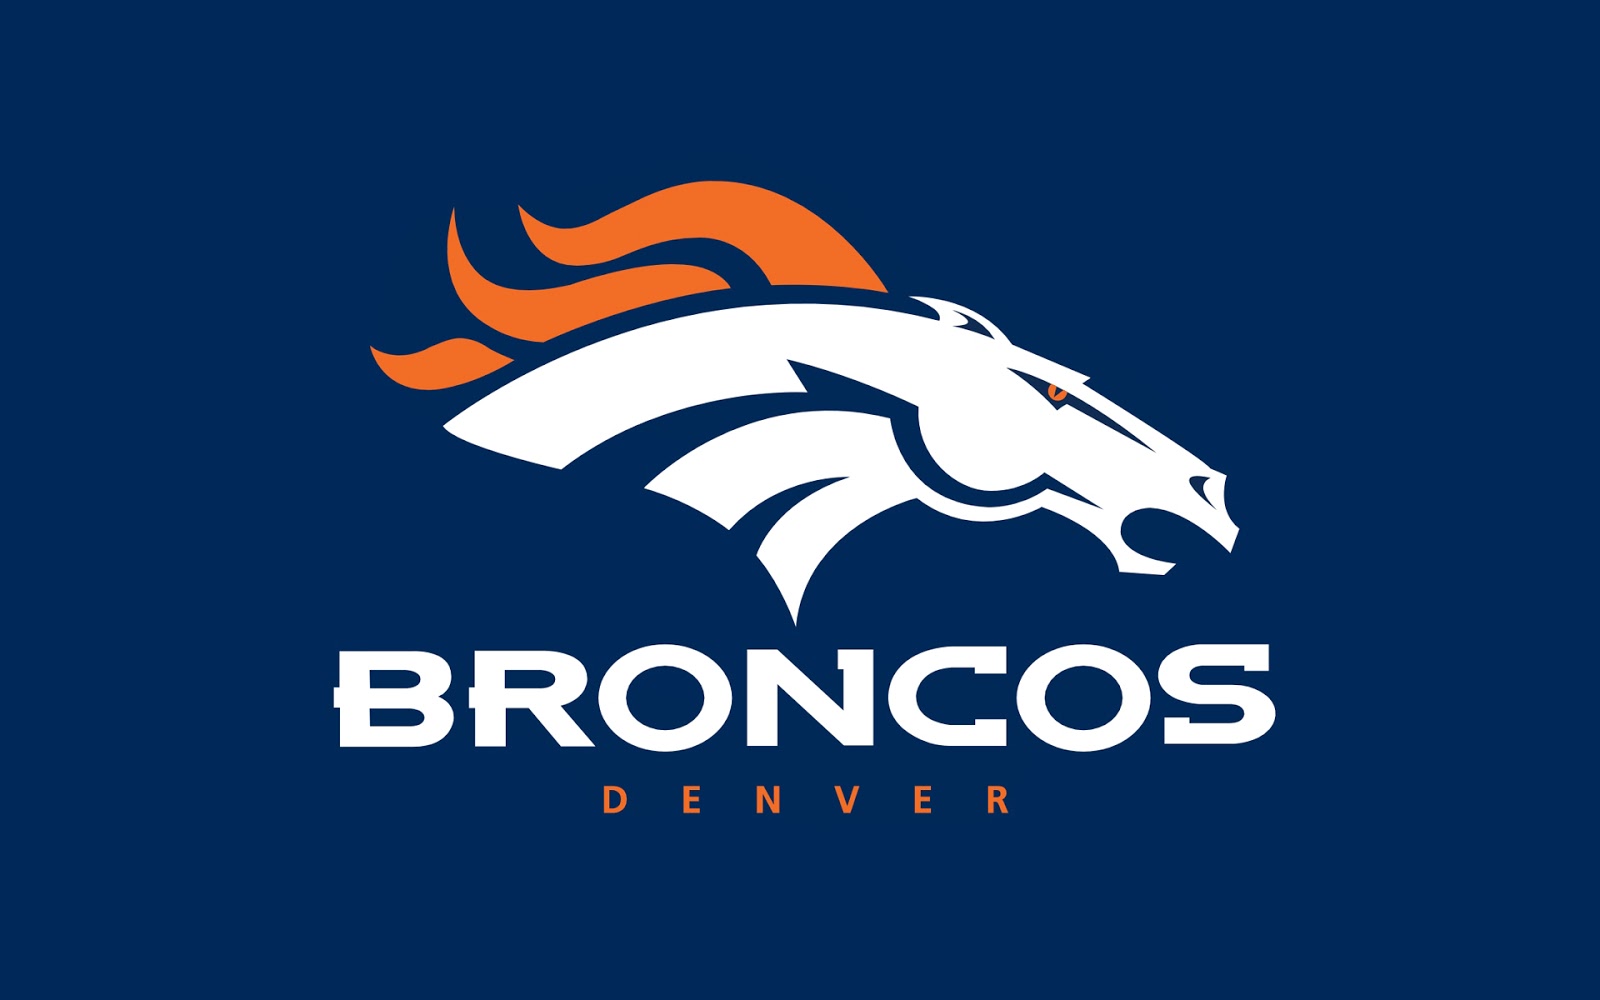 That The Denver Broncos Will Defeat Seattle Seahawks In Super Bowl